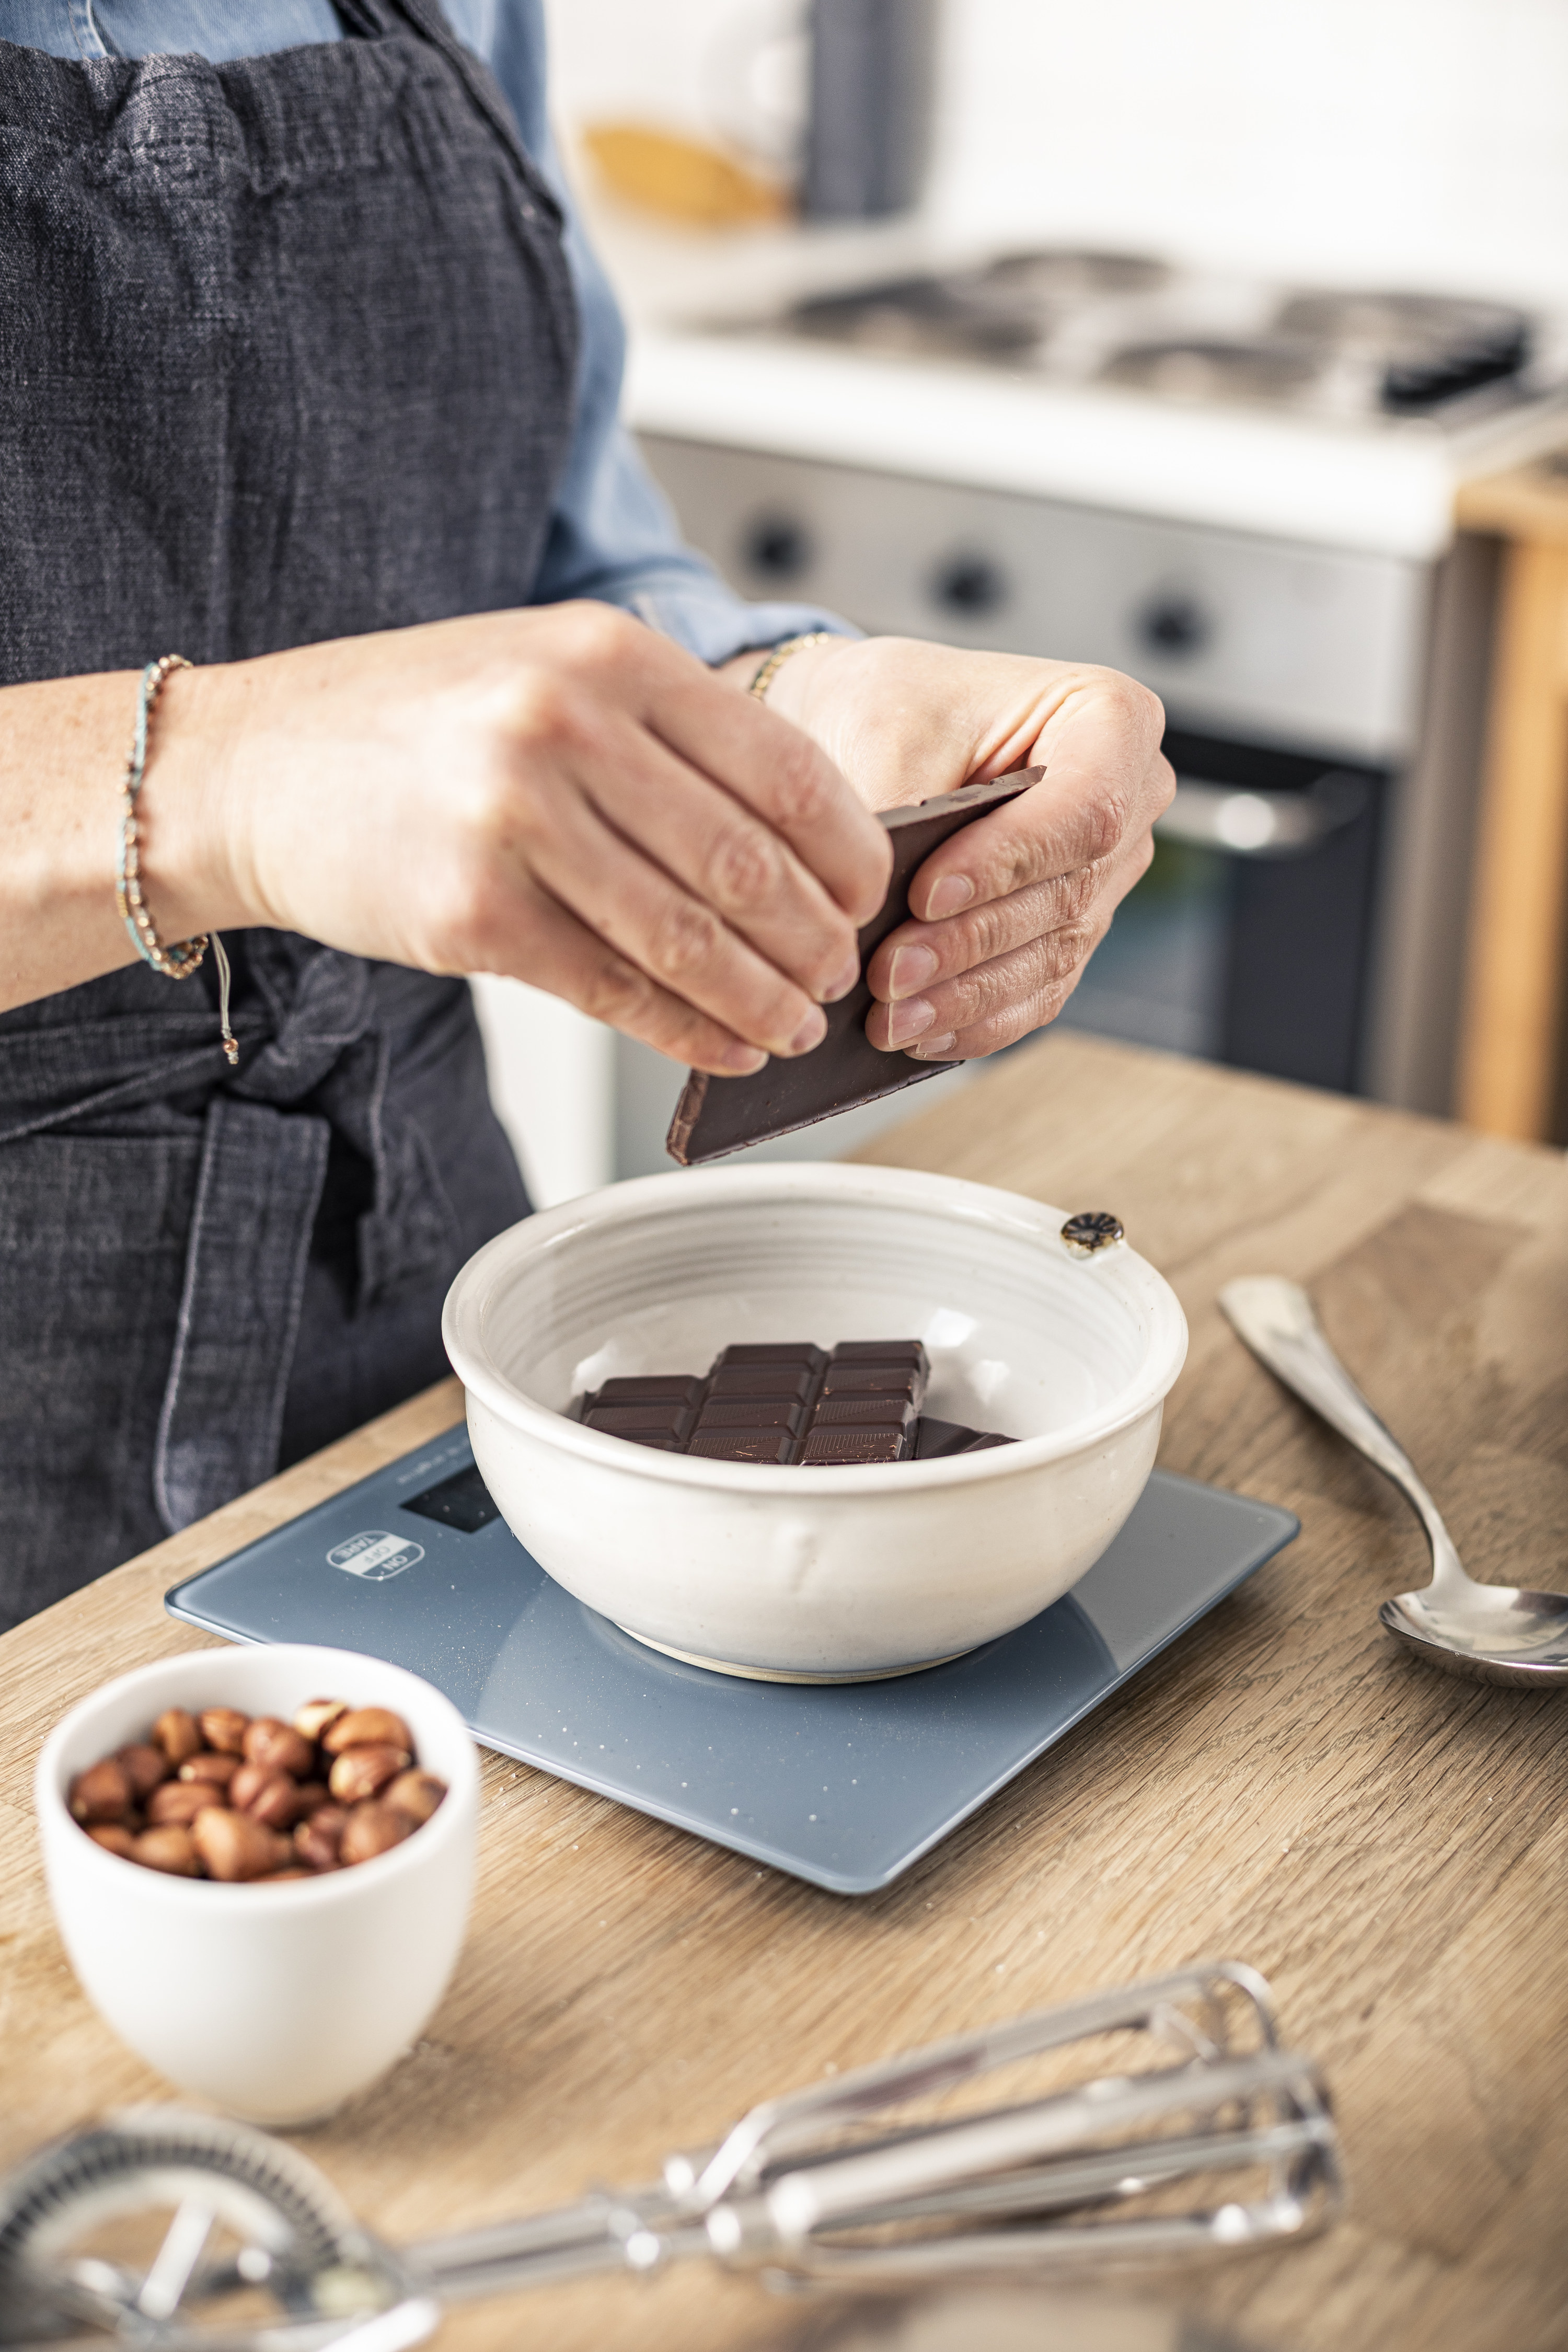 Woman measuring chocolate for a recipe